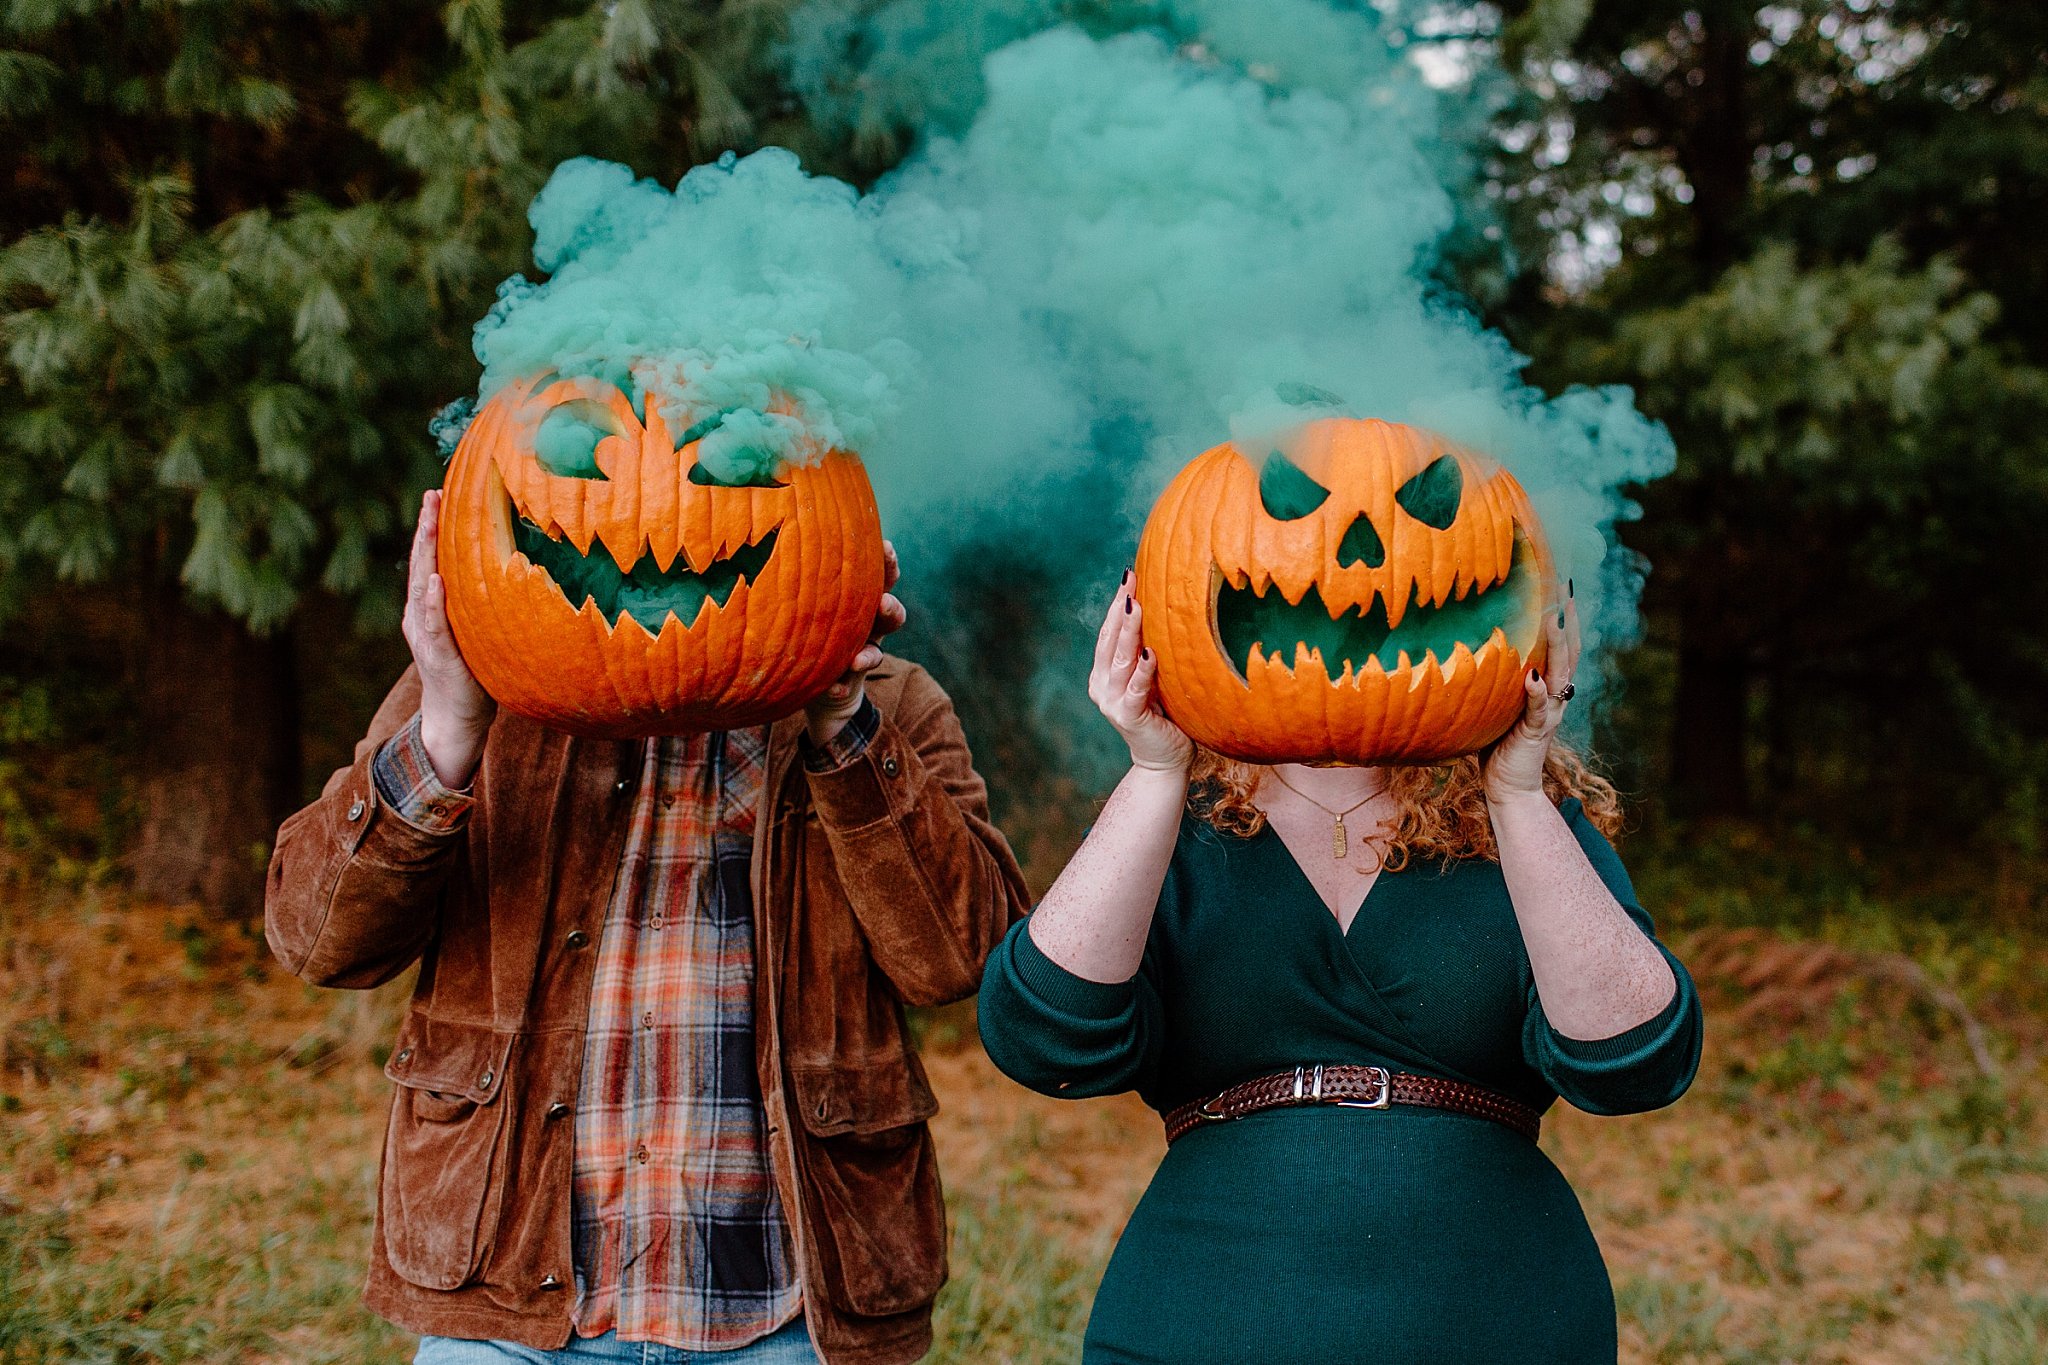  jack-o-lanterns cover heads of two people by Arizona elopement photographer 